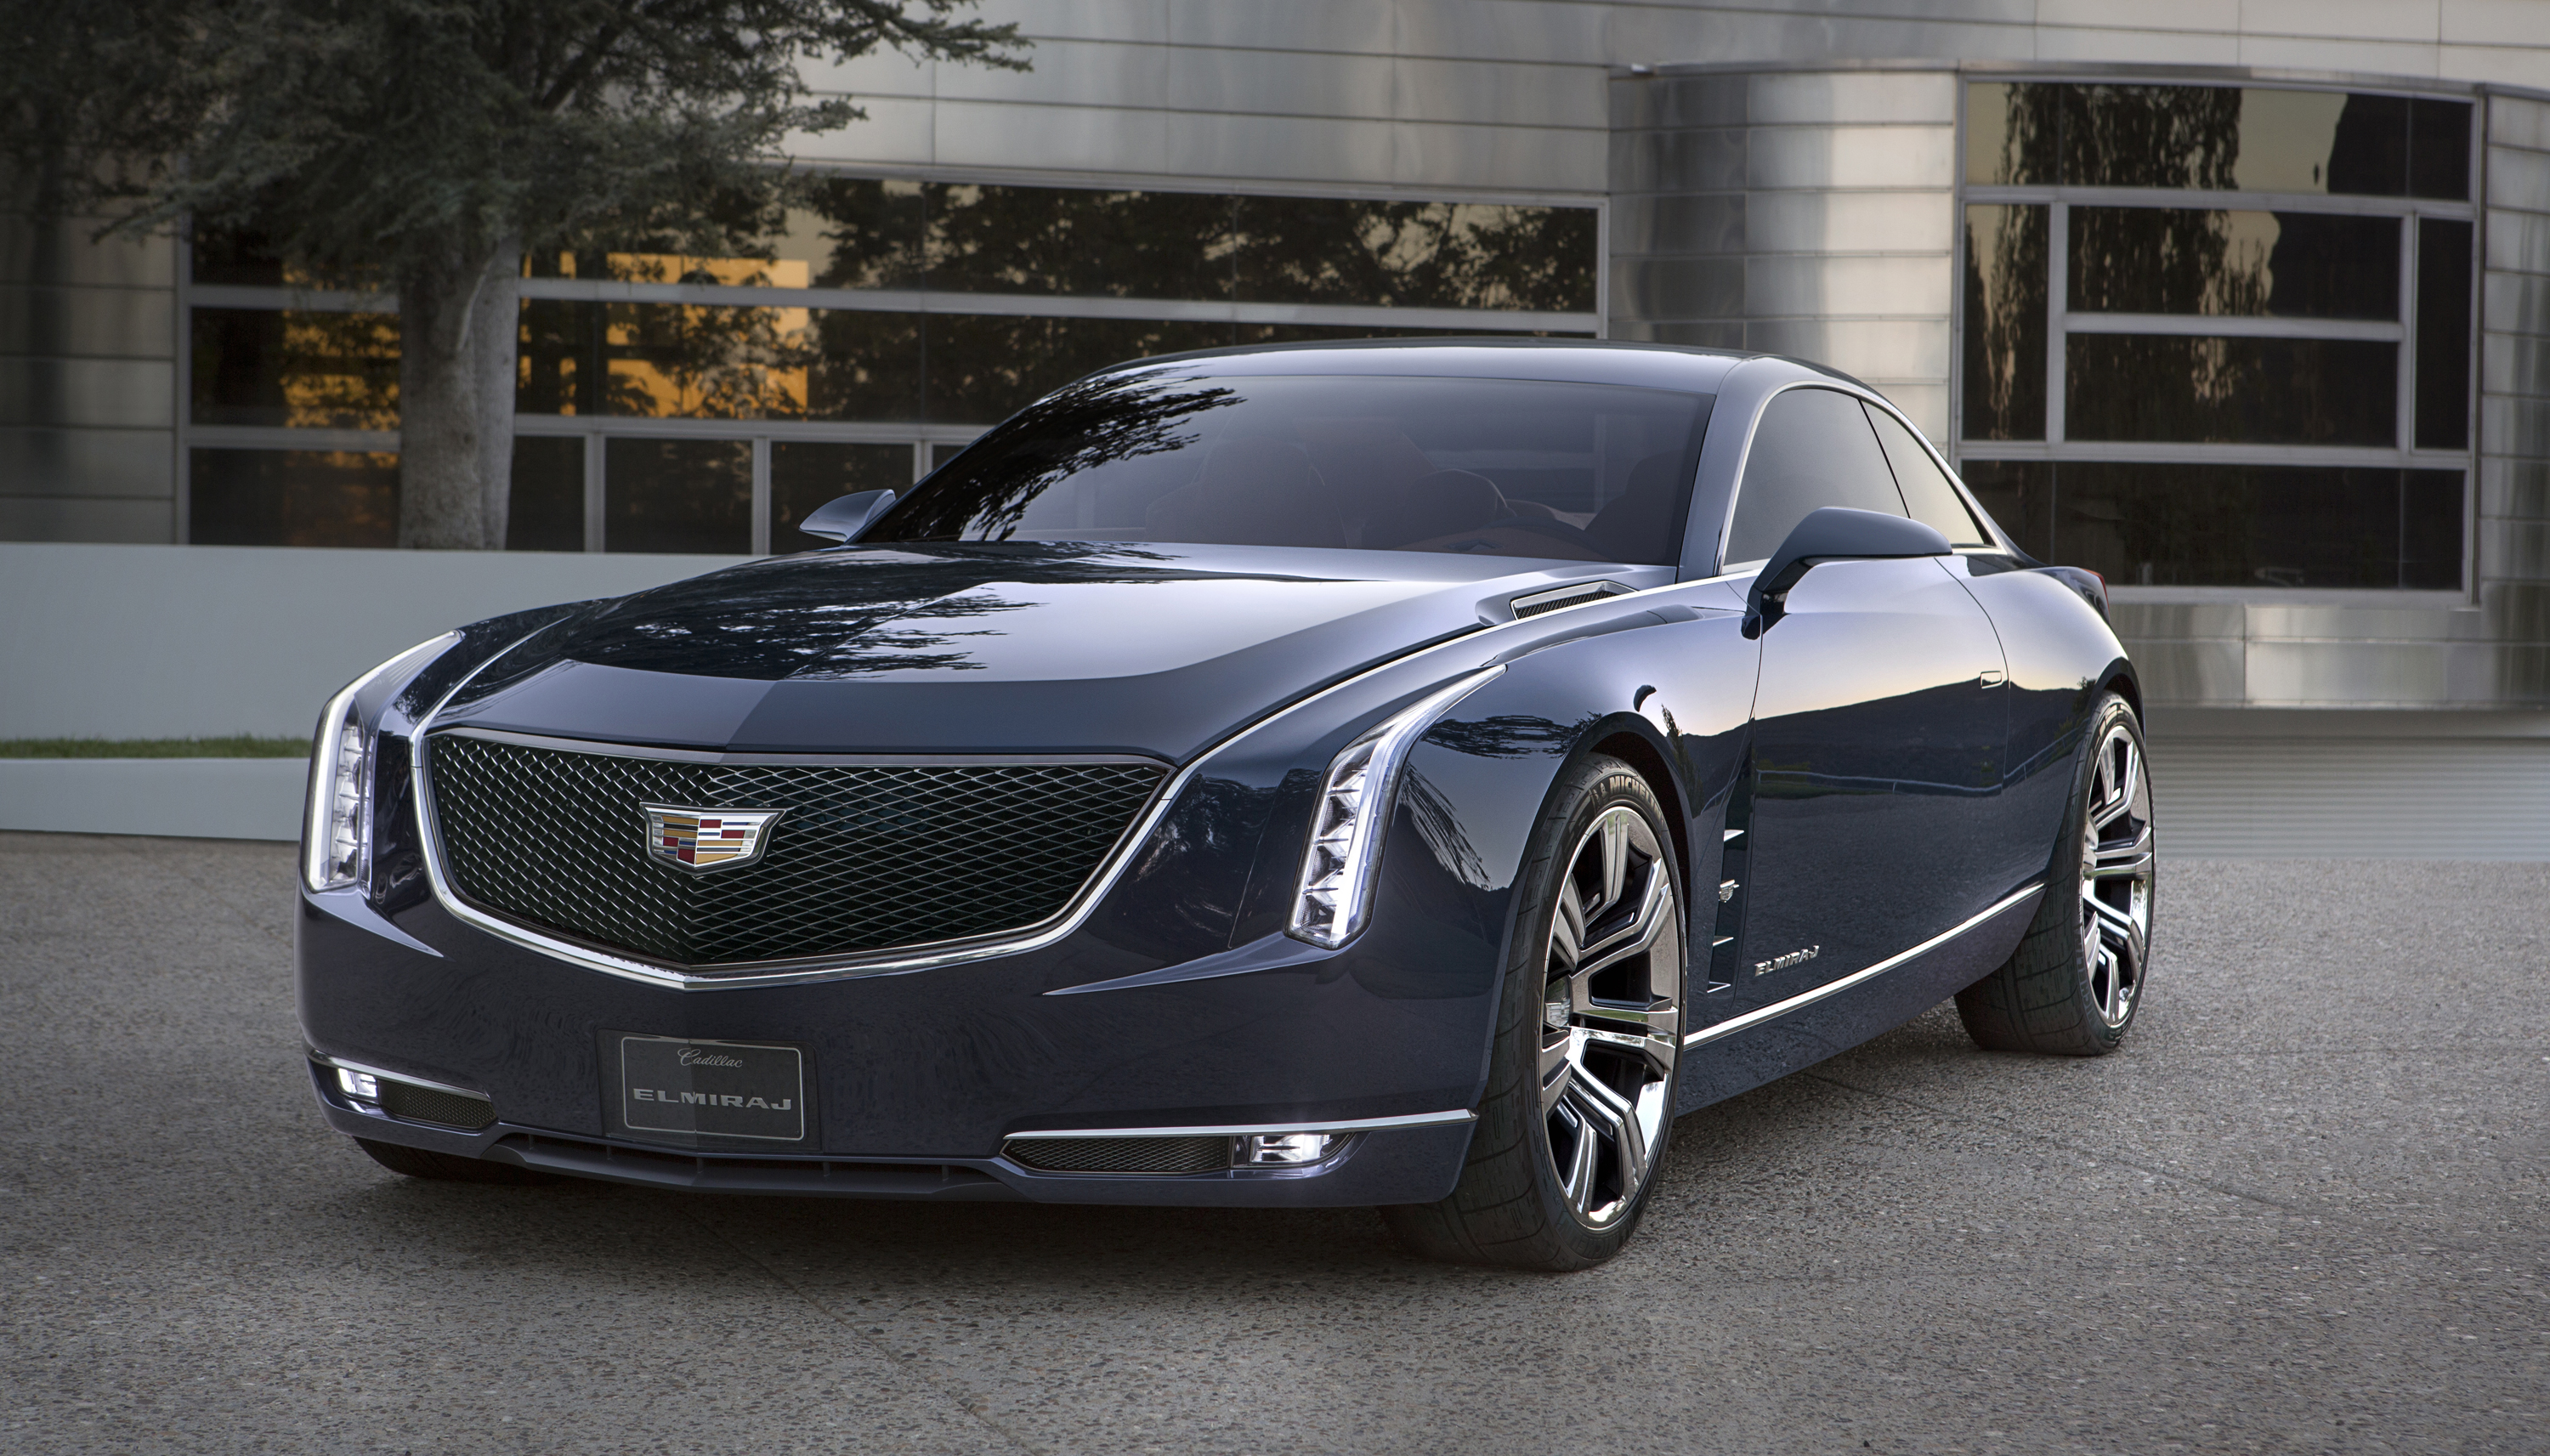 The new Cadillac Elmiraj Concept is a design vision for a four-seat coupe with presence and poise, 205-inches in length. Taking up from where the memorable Ciel Concept left off, Elmiraj is a statement of pure luxury and performance with a purposeful character and proportion.